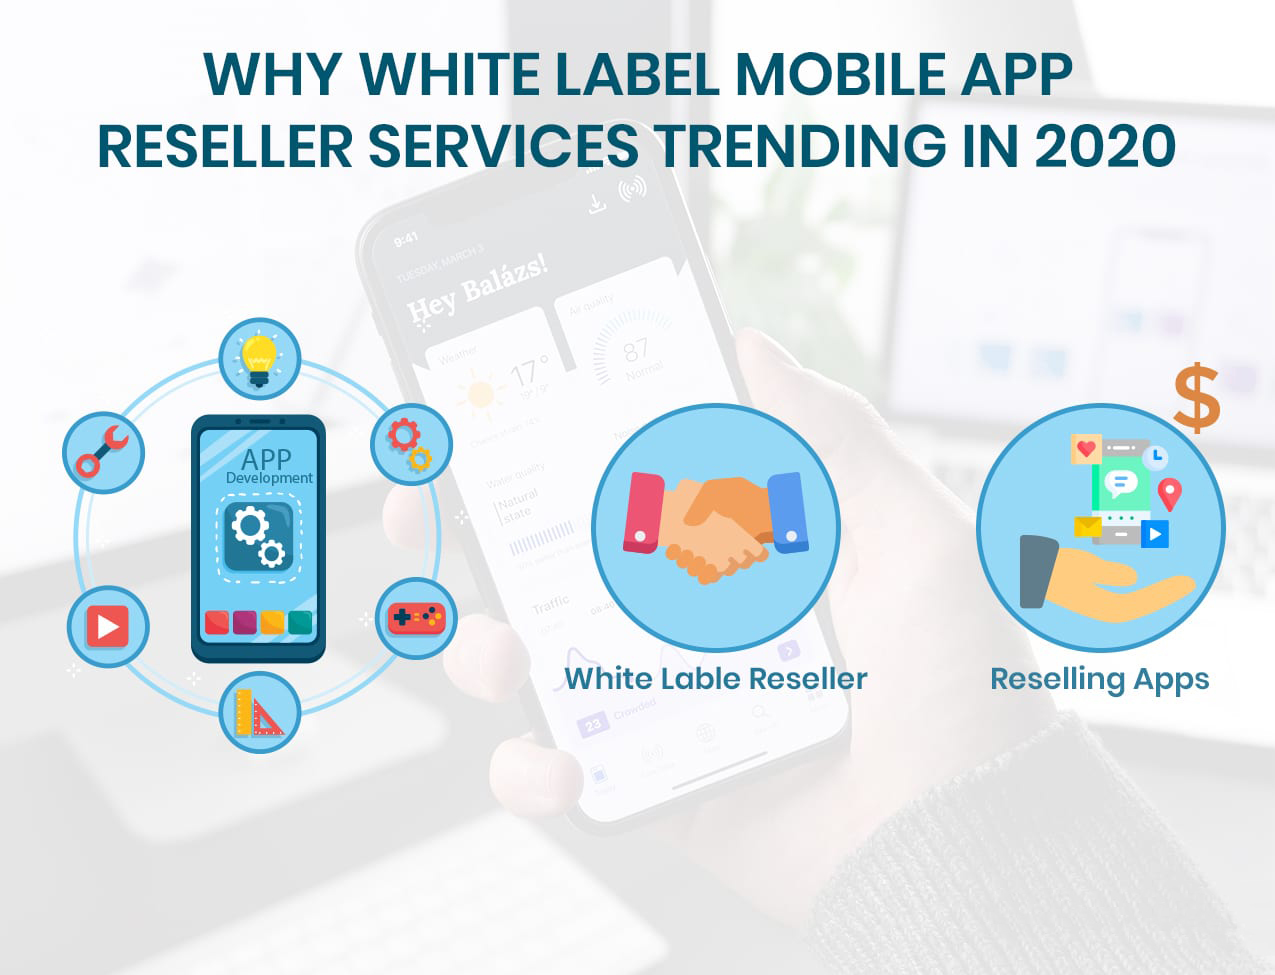 Why White Label Mobile App Reseller Services Trending in 2020